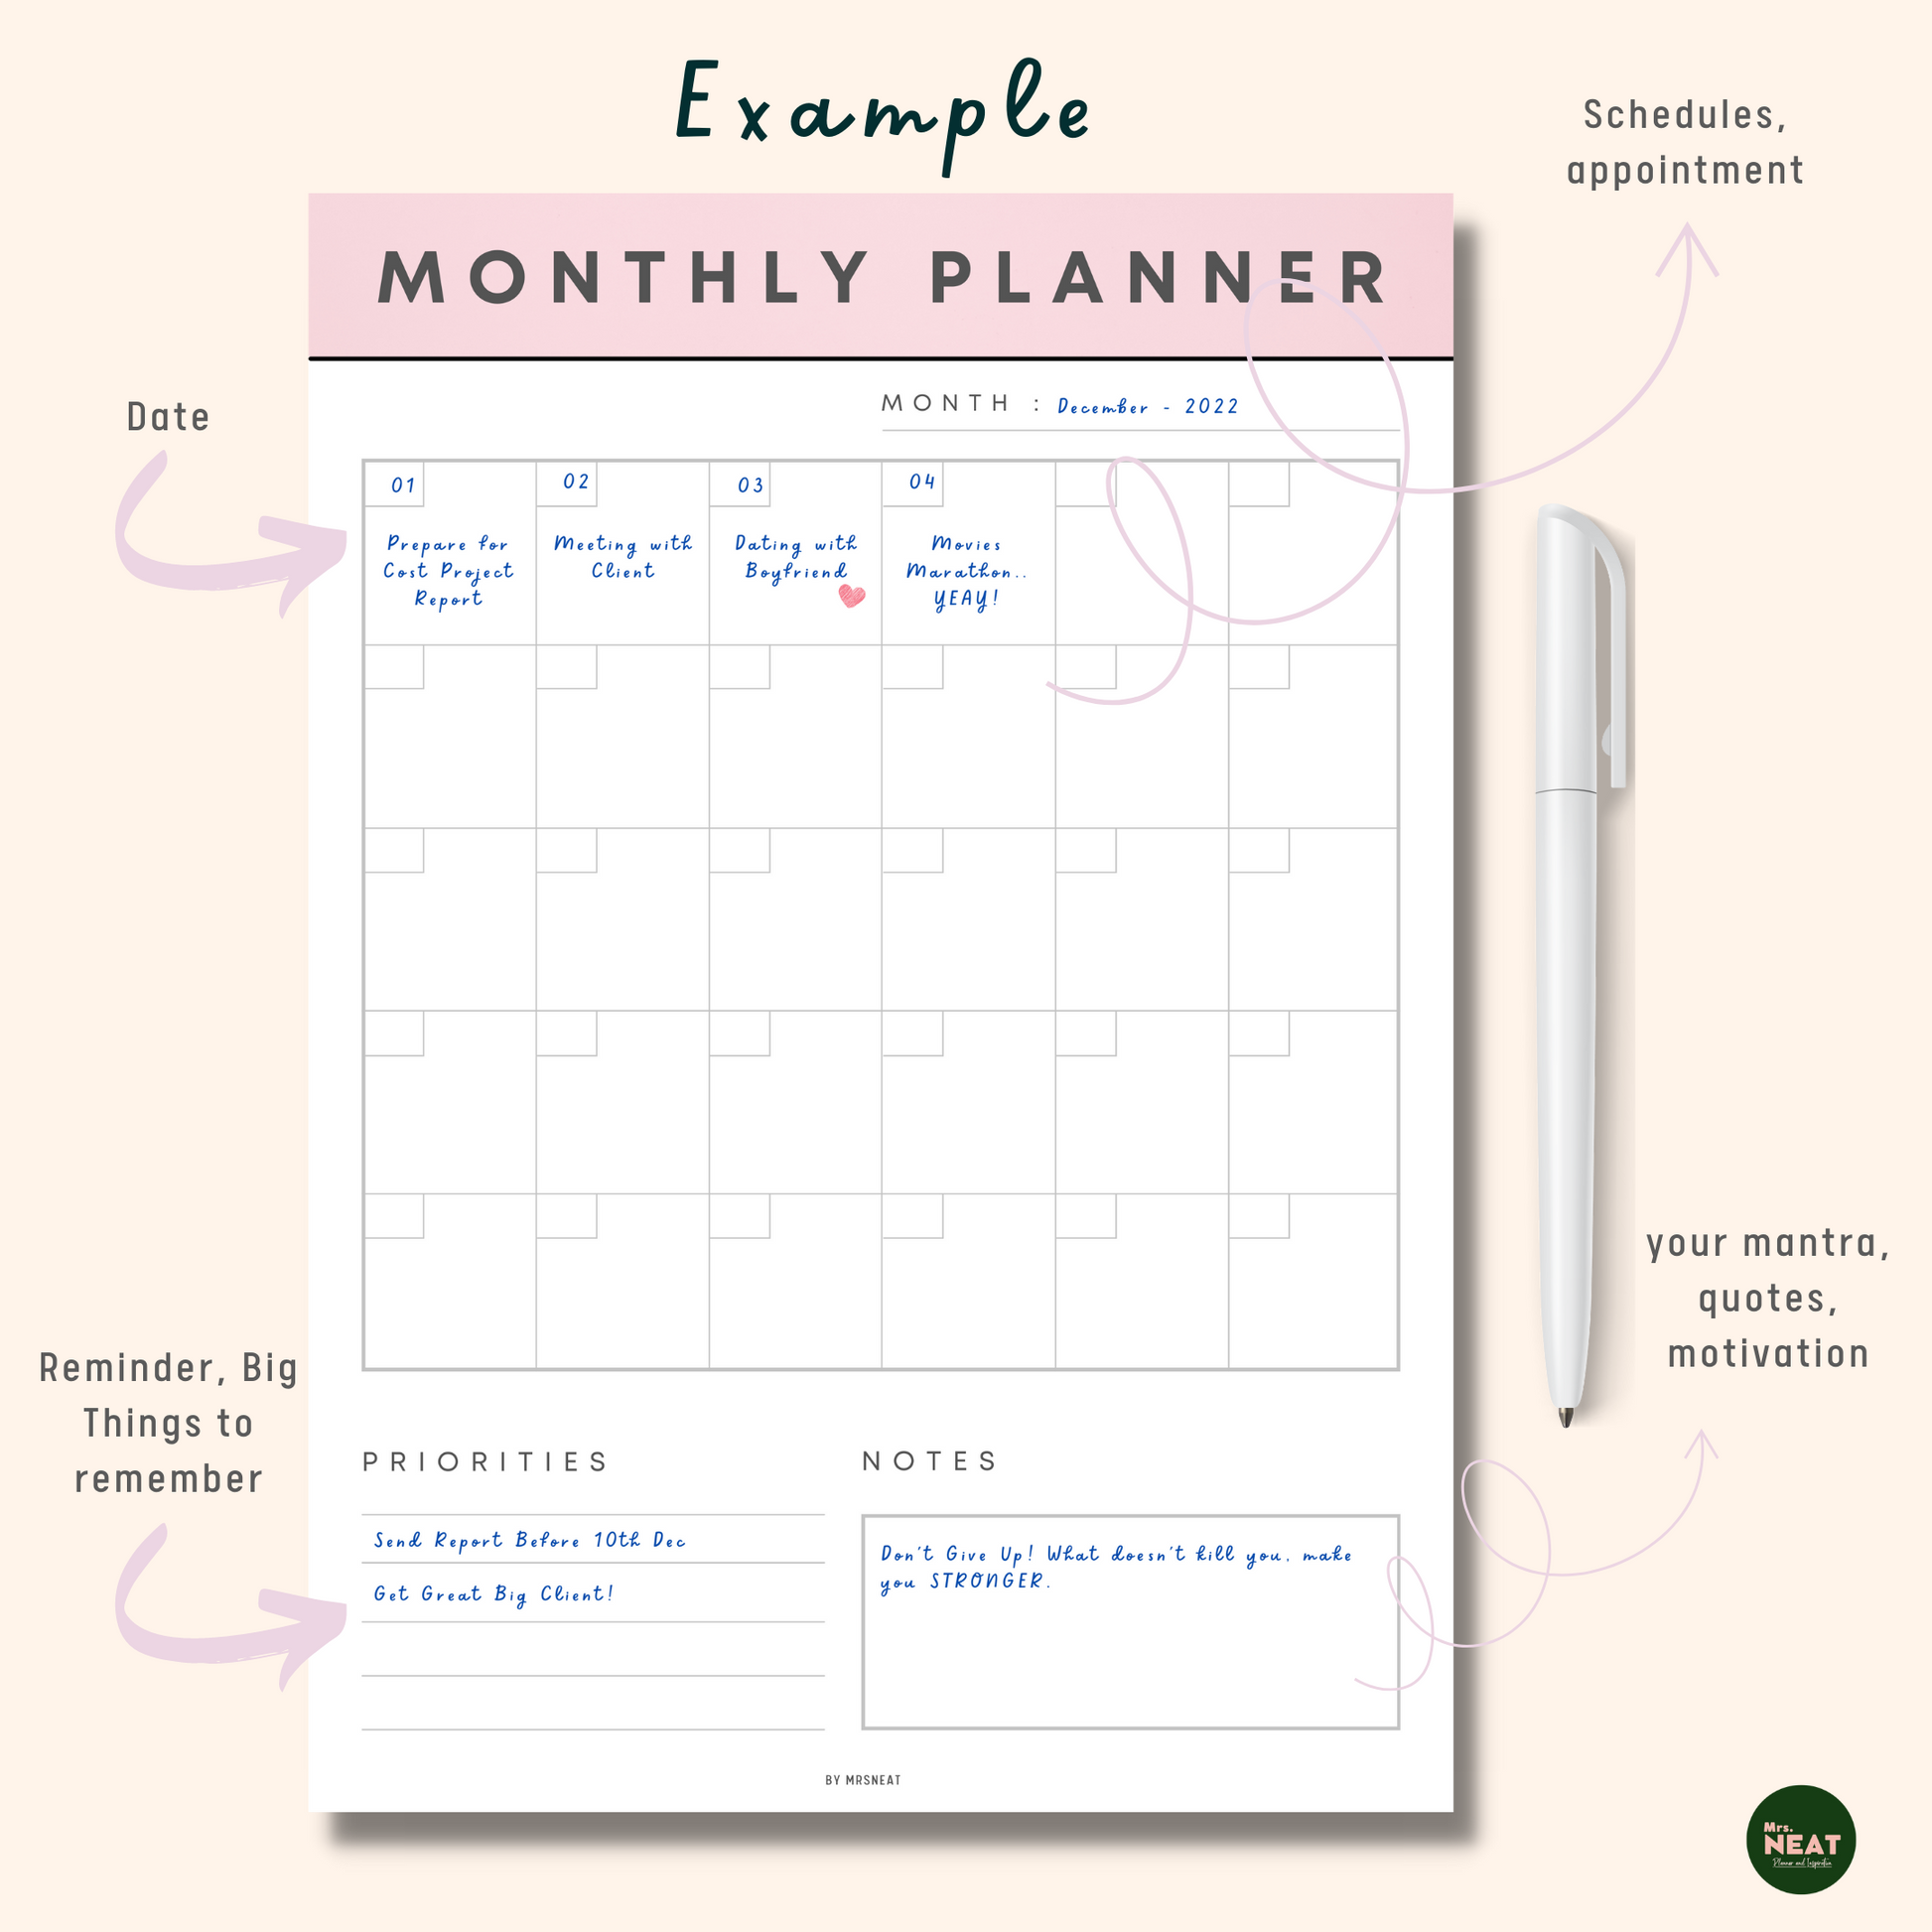 Adorable Pink Monthly Planner in Minimalist design with dated and schedules as an example